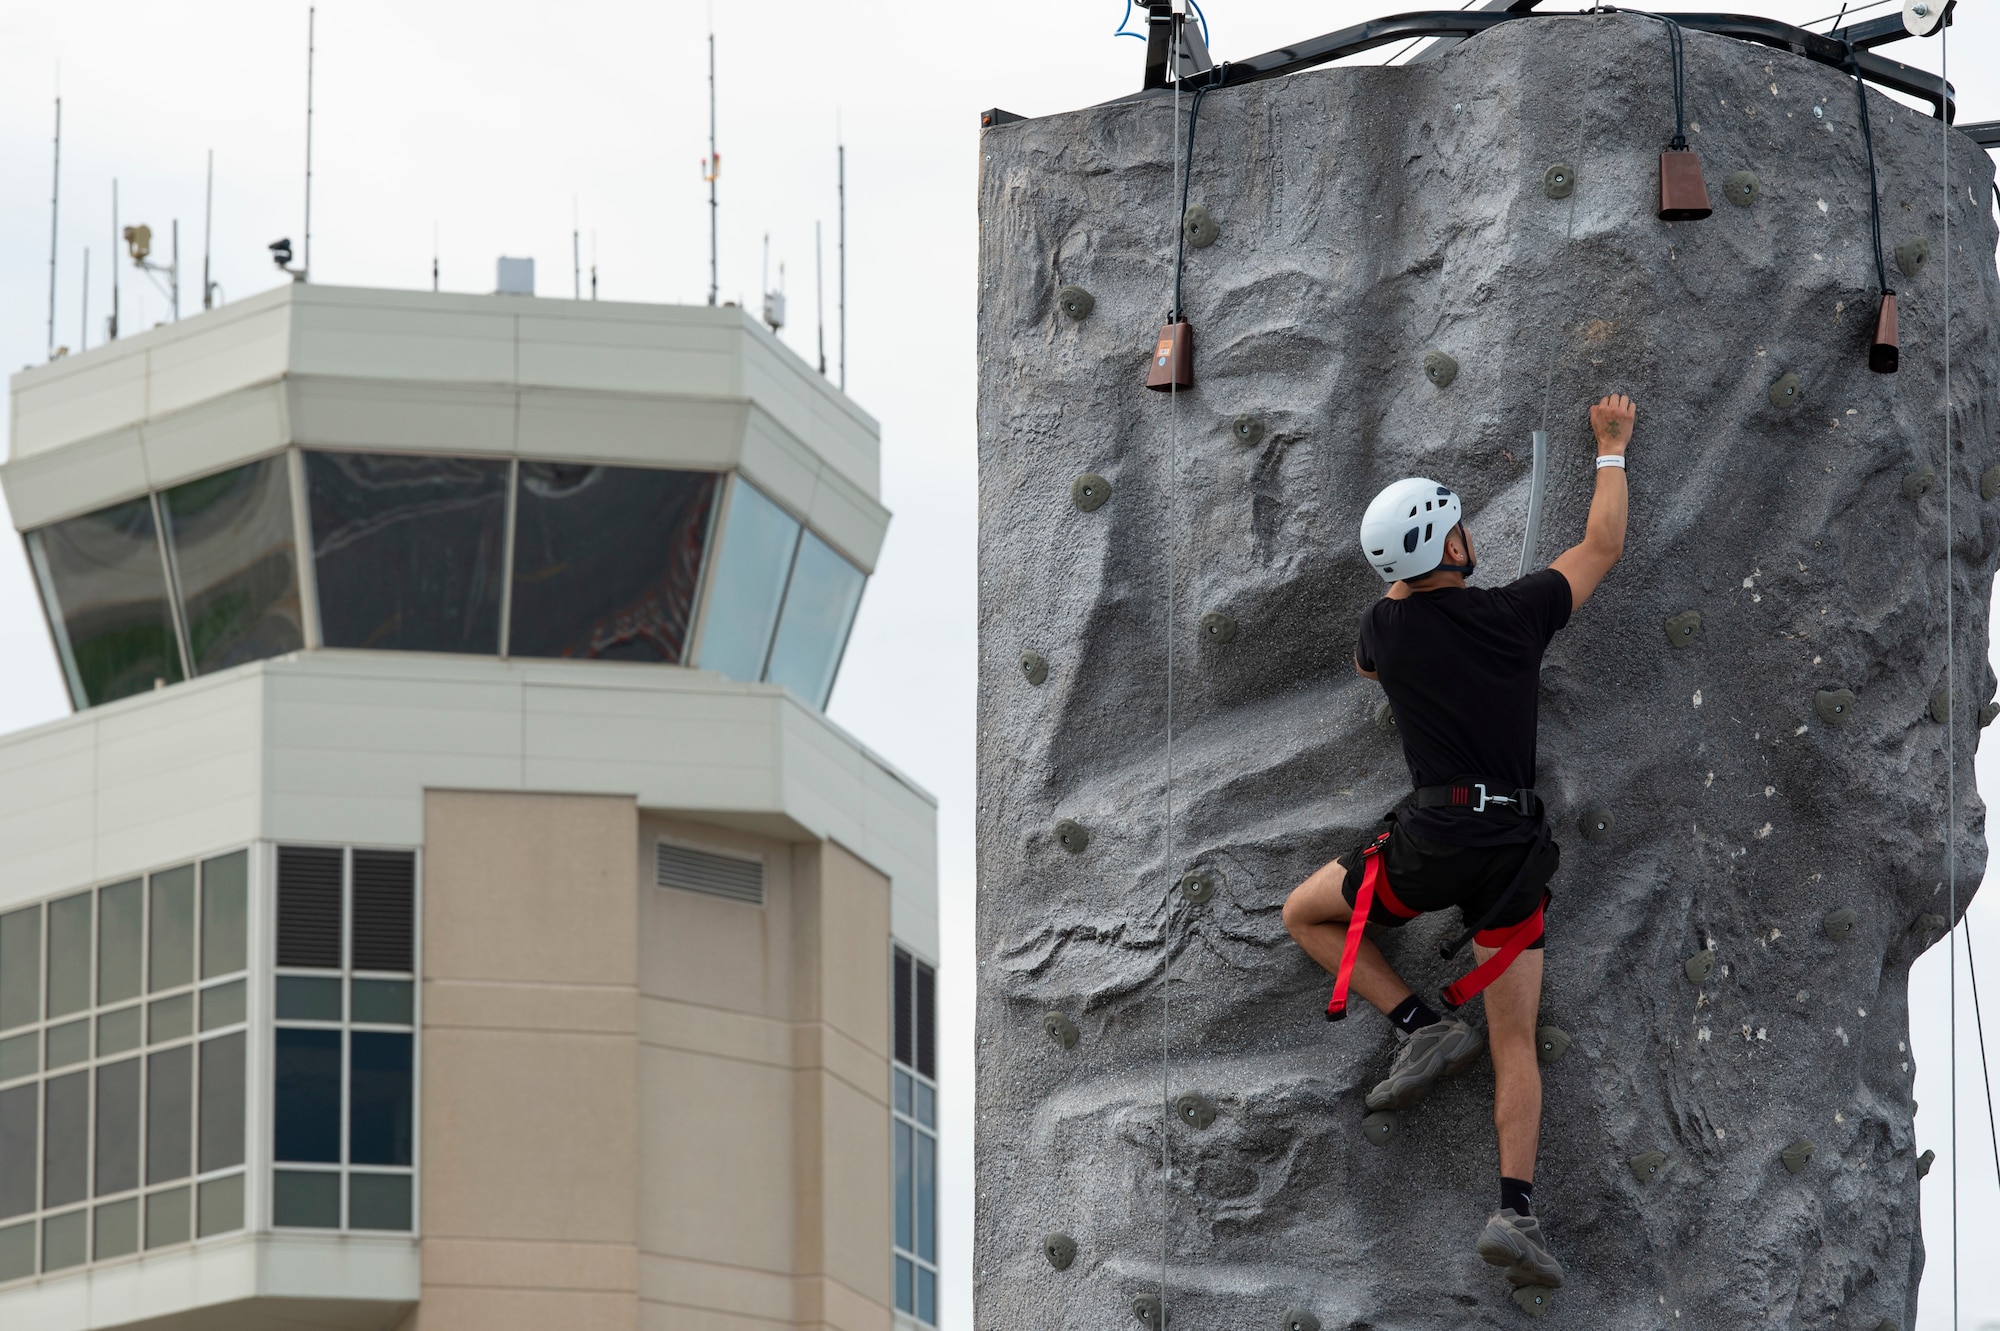 Yeshua Martinez, from Northfield, New Jersey, climbs up the rock wall during the second day of the 2022 Thunder Over Dover Airshow at Dover Air Force Base, Delaware, May 21, 2022. The airshow’s theme was “Reunite,” in celebration of people coming together after the COVID-19 pandemic. (U.S. Air Force photo by Roland Balik)